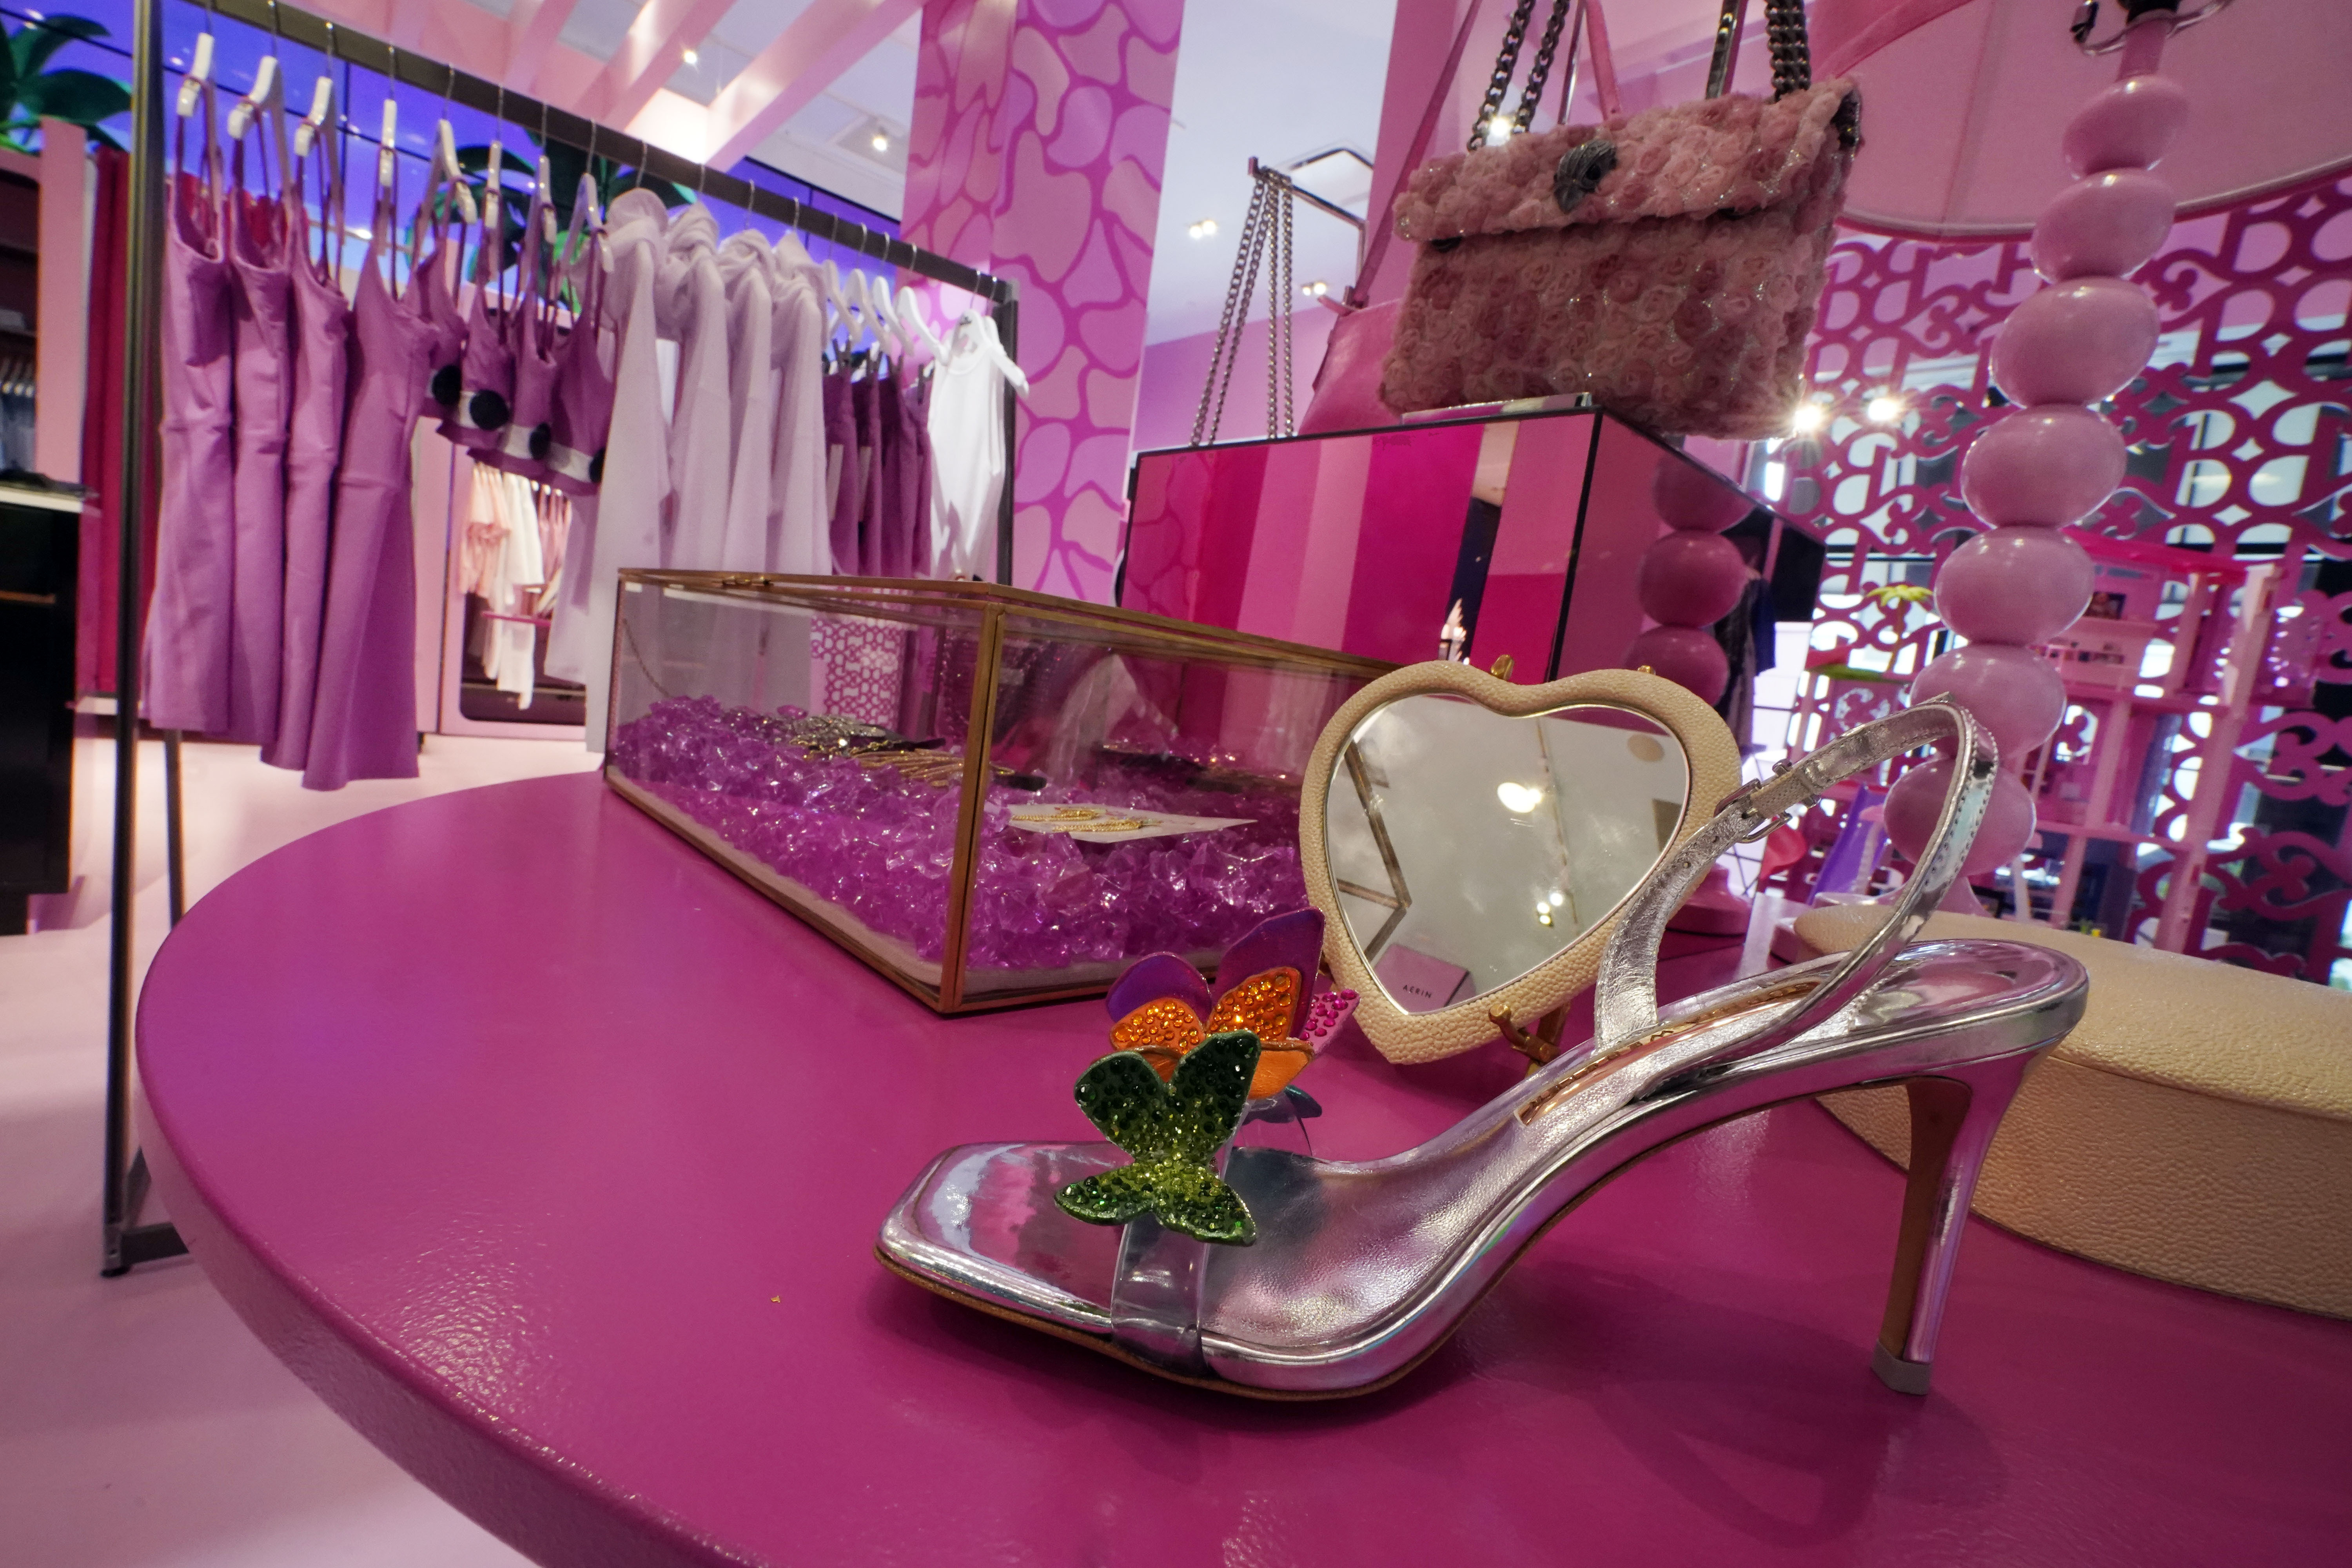 FILE - Barbie-themed merchandise is displayed in a special section at Bloomingdale's, in New York, Thursday, July 20, 2023. According to the fashion company LYST, the "Barbiecore" trend began after pictures of a pink-clad Margot Robbie surfaced online in June 2022, a year before the actor's "Barbie" movie came out and toy maker Mattel launched its own marketing blitz to promote the color. (AP Photo/Richard Drew, File)